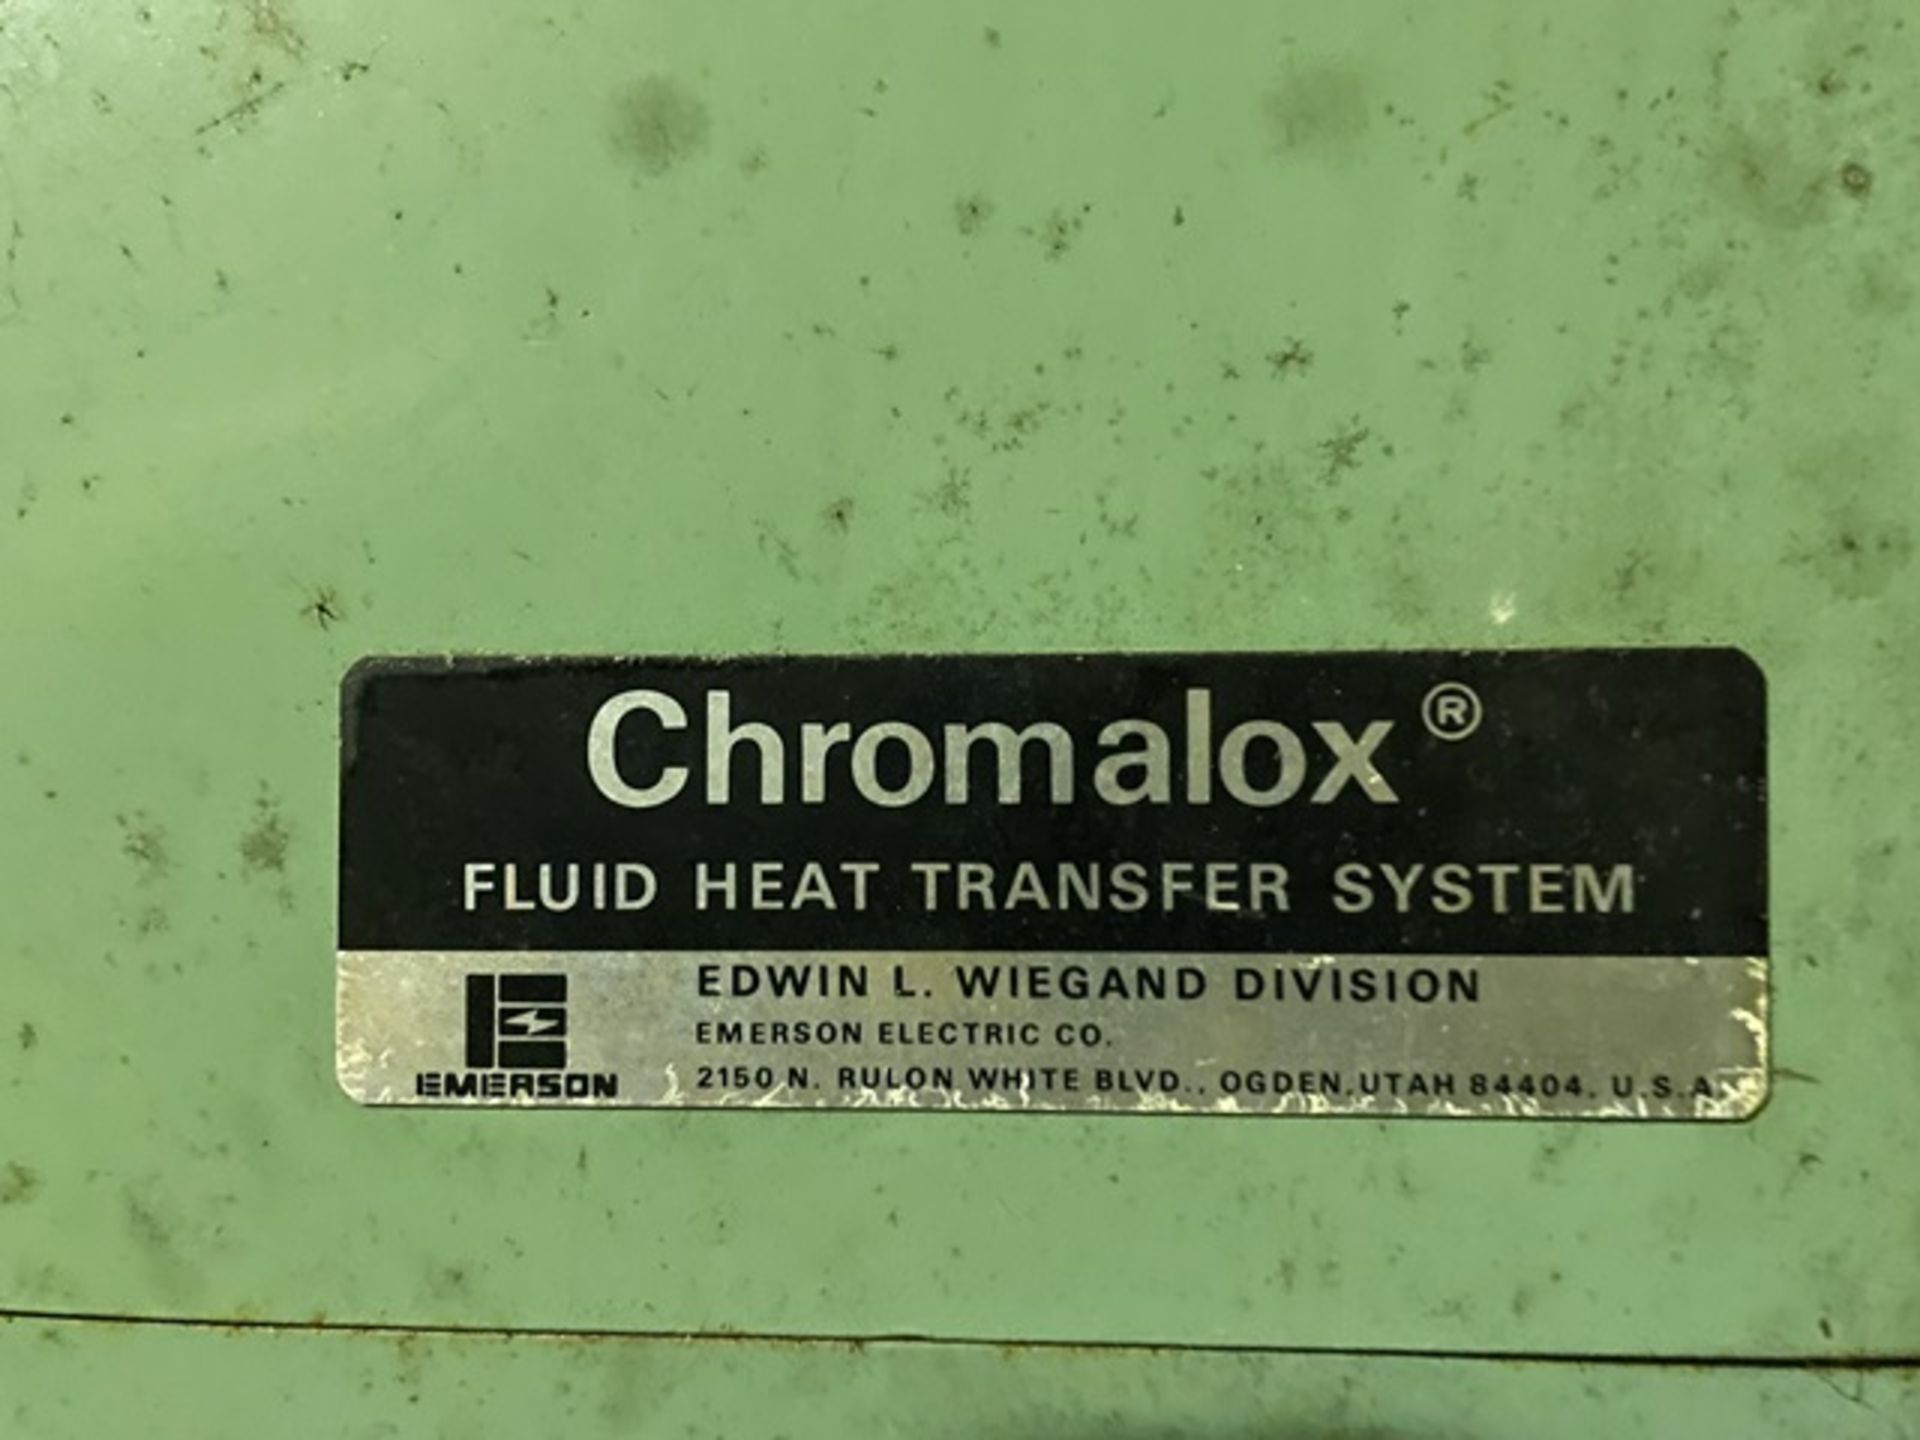 Chromolax Fluid Heat Transfer System, ID #1 Hot Oil Package - Image 3 of 3